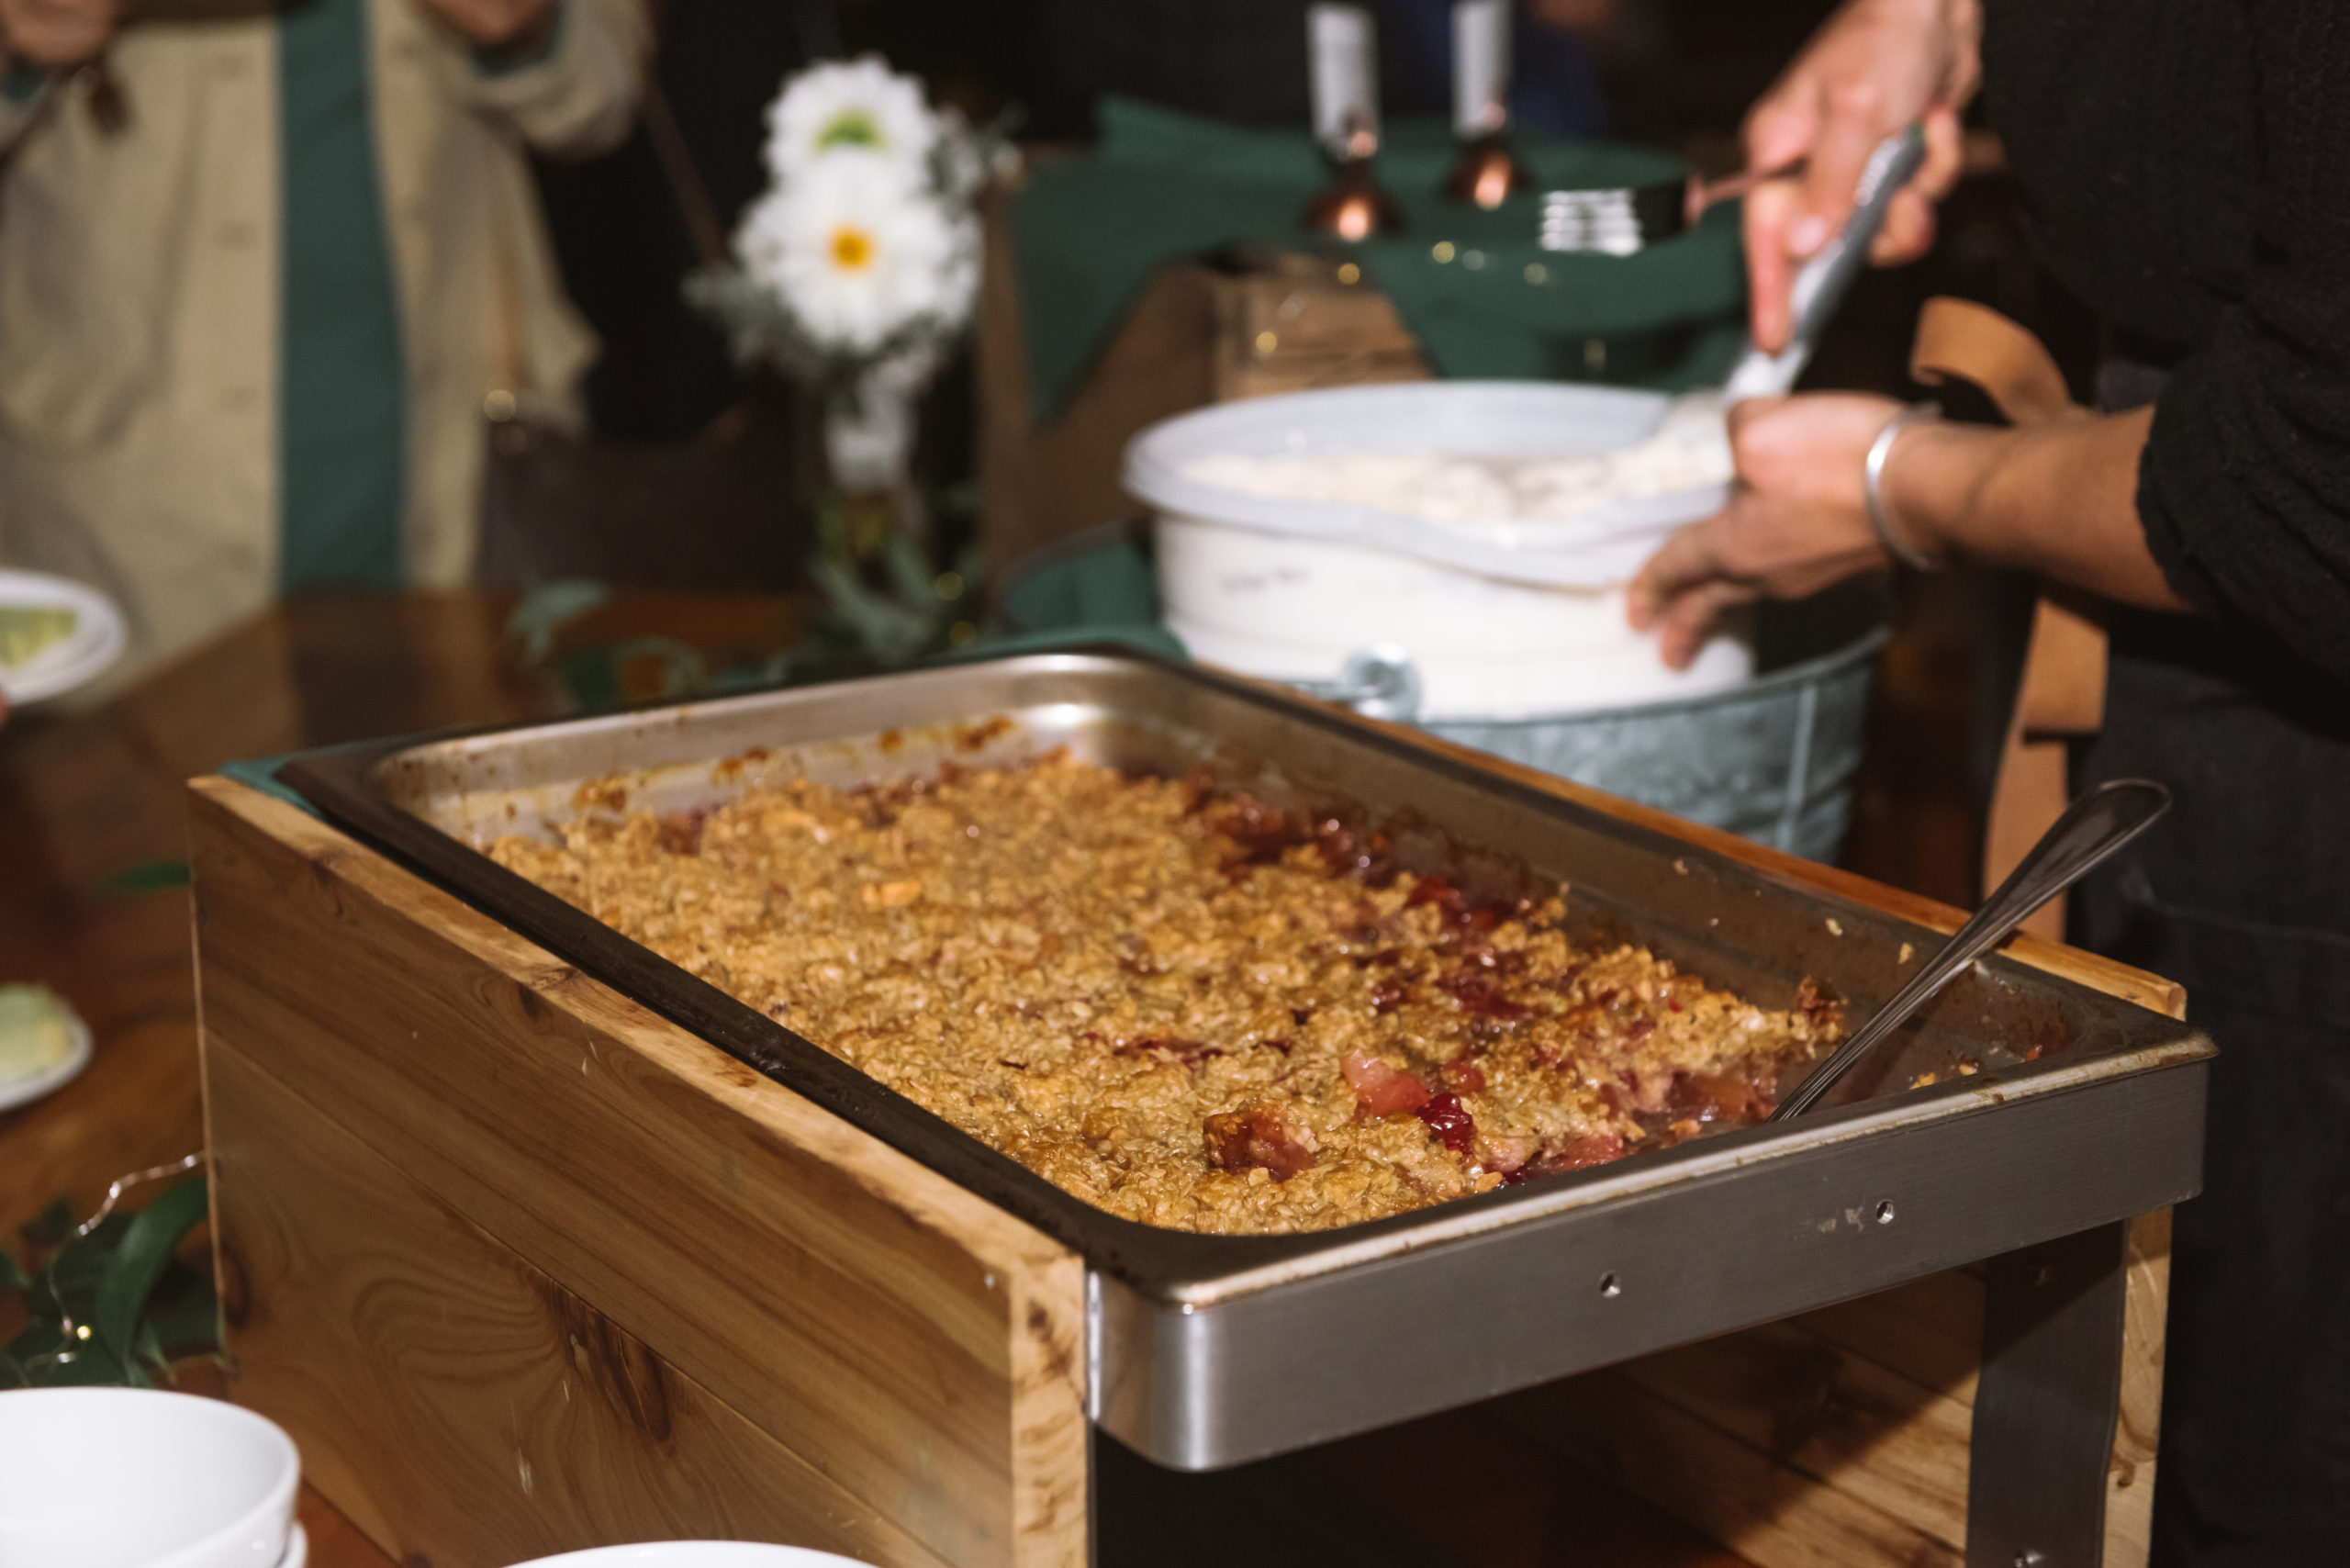 Detail of a tray of apple crumble pie and in the background is someone scooping a ball of vanilla ice cream from the ice cream tub.